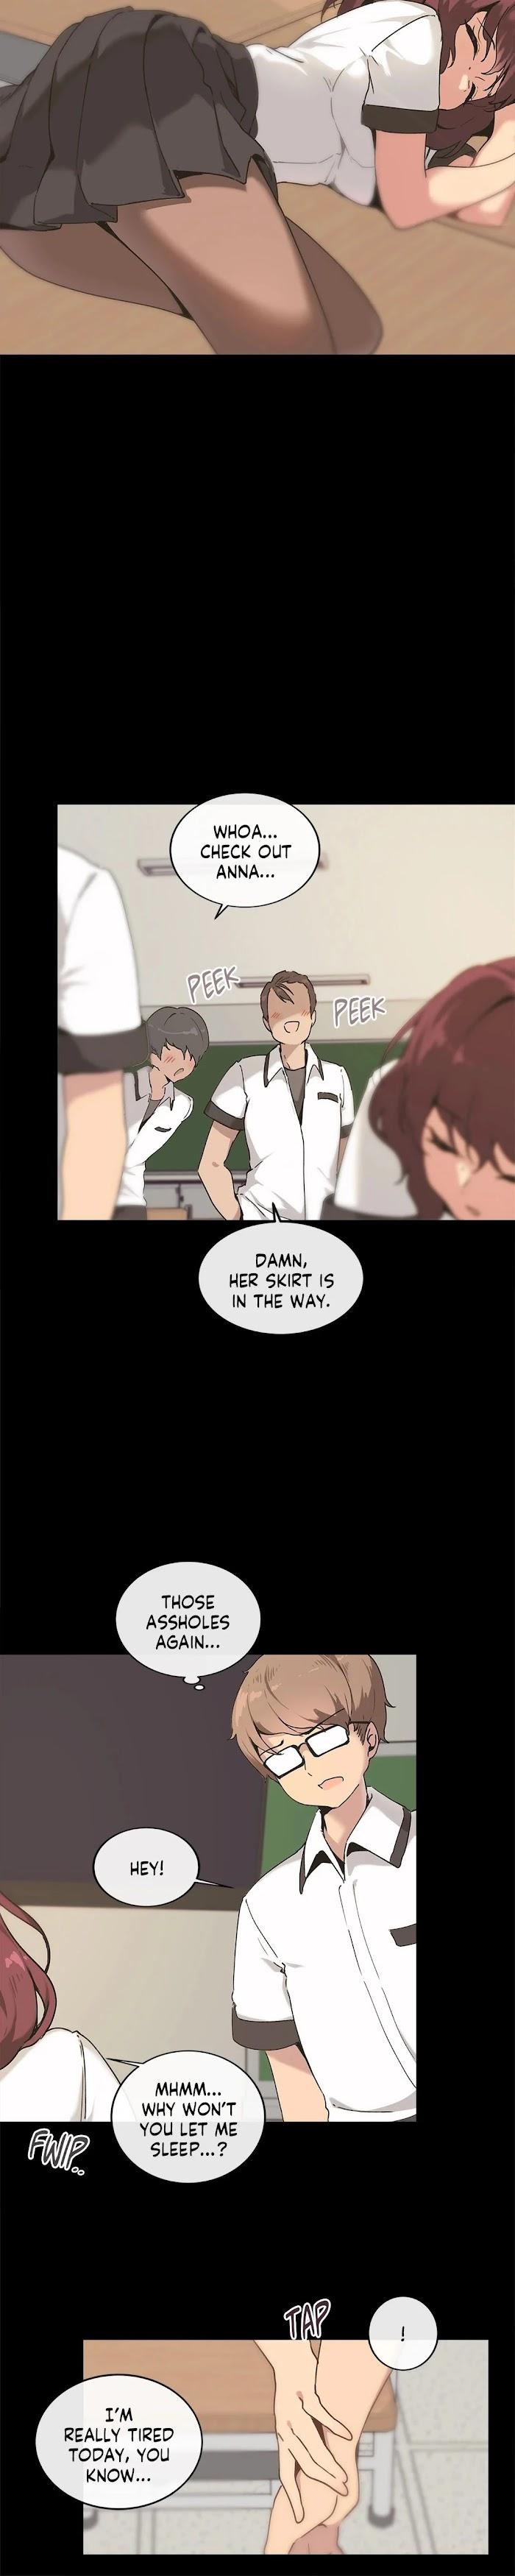 [Dumangoon, 130F] Sexcape Room: Wipe Out Ch.9/9 [English] [Manhwa PDF] Completed 80